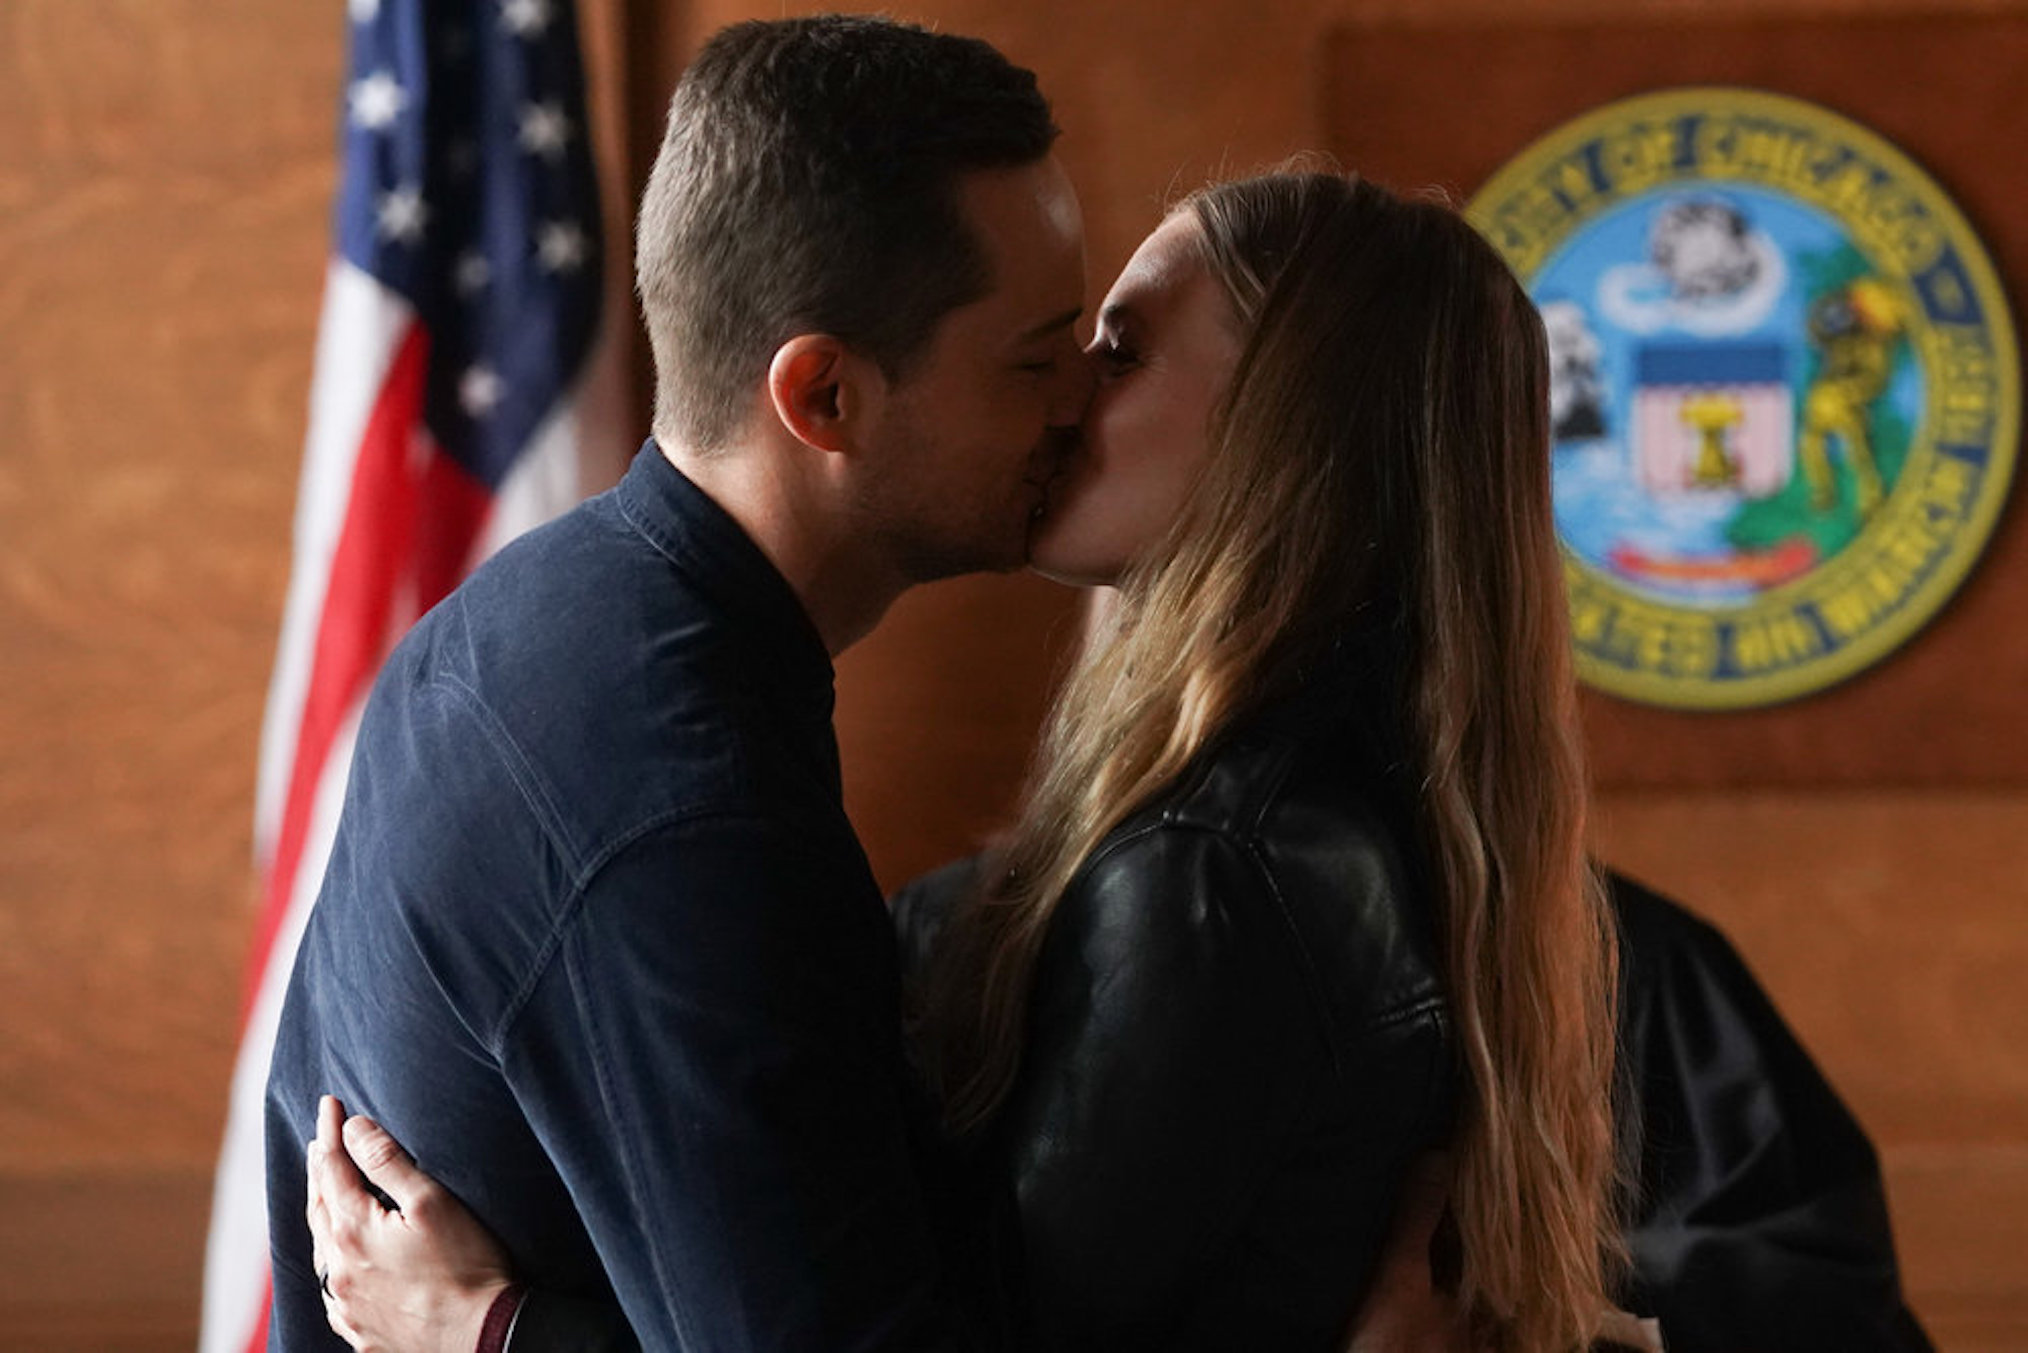 Jesse Lee Soffer as Jay Halstead, Tracy Spiridakos as Hailey Upton in Chicago PD